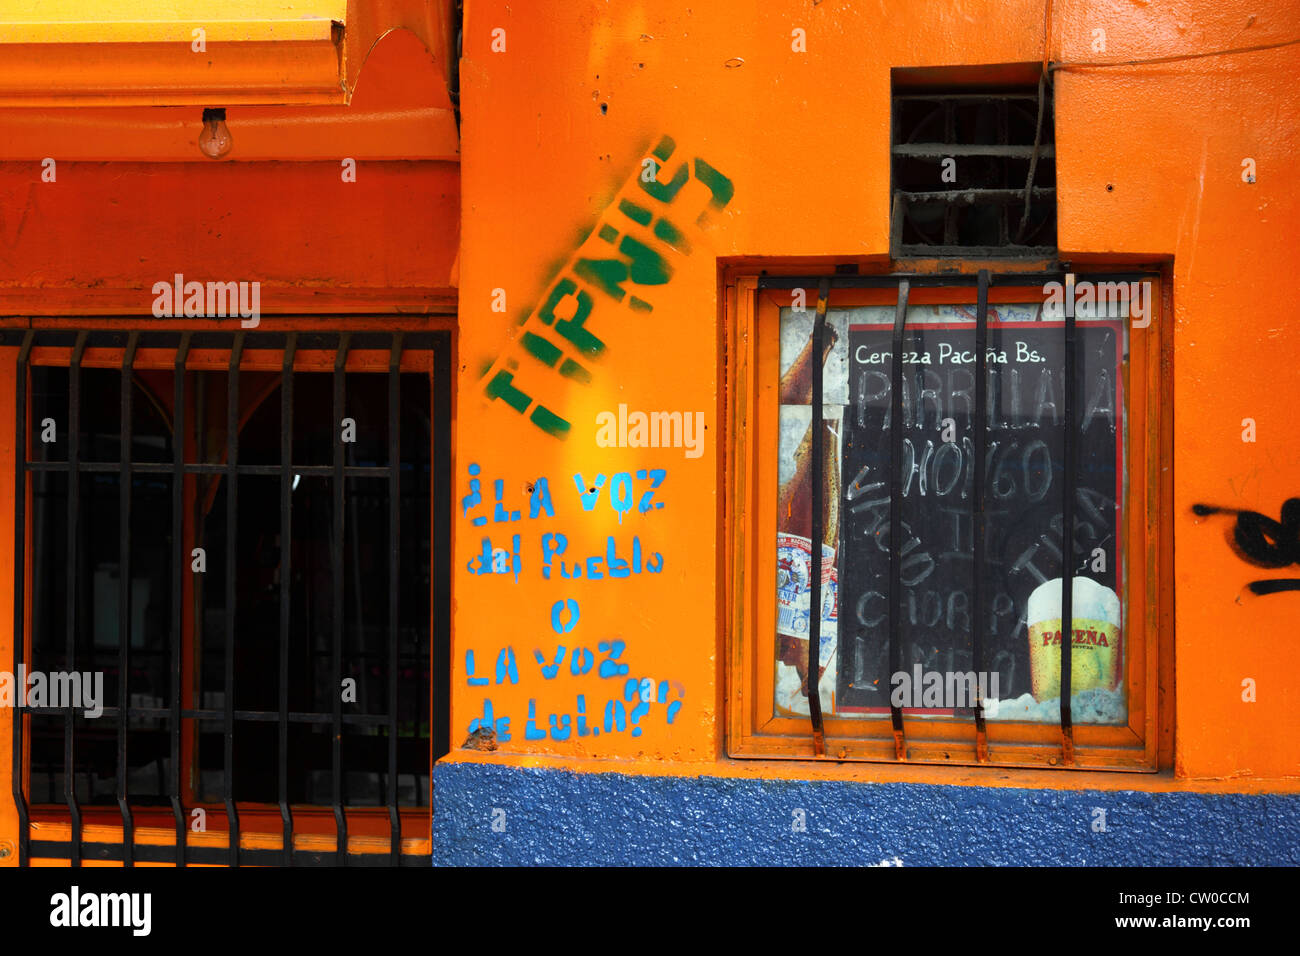 Graffiti protesting against plans to build a road through the TIPNIS Indigenous Territory and National Park, La Paz; Bolivia Stock Photo